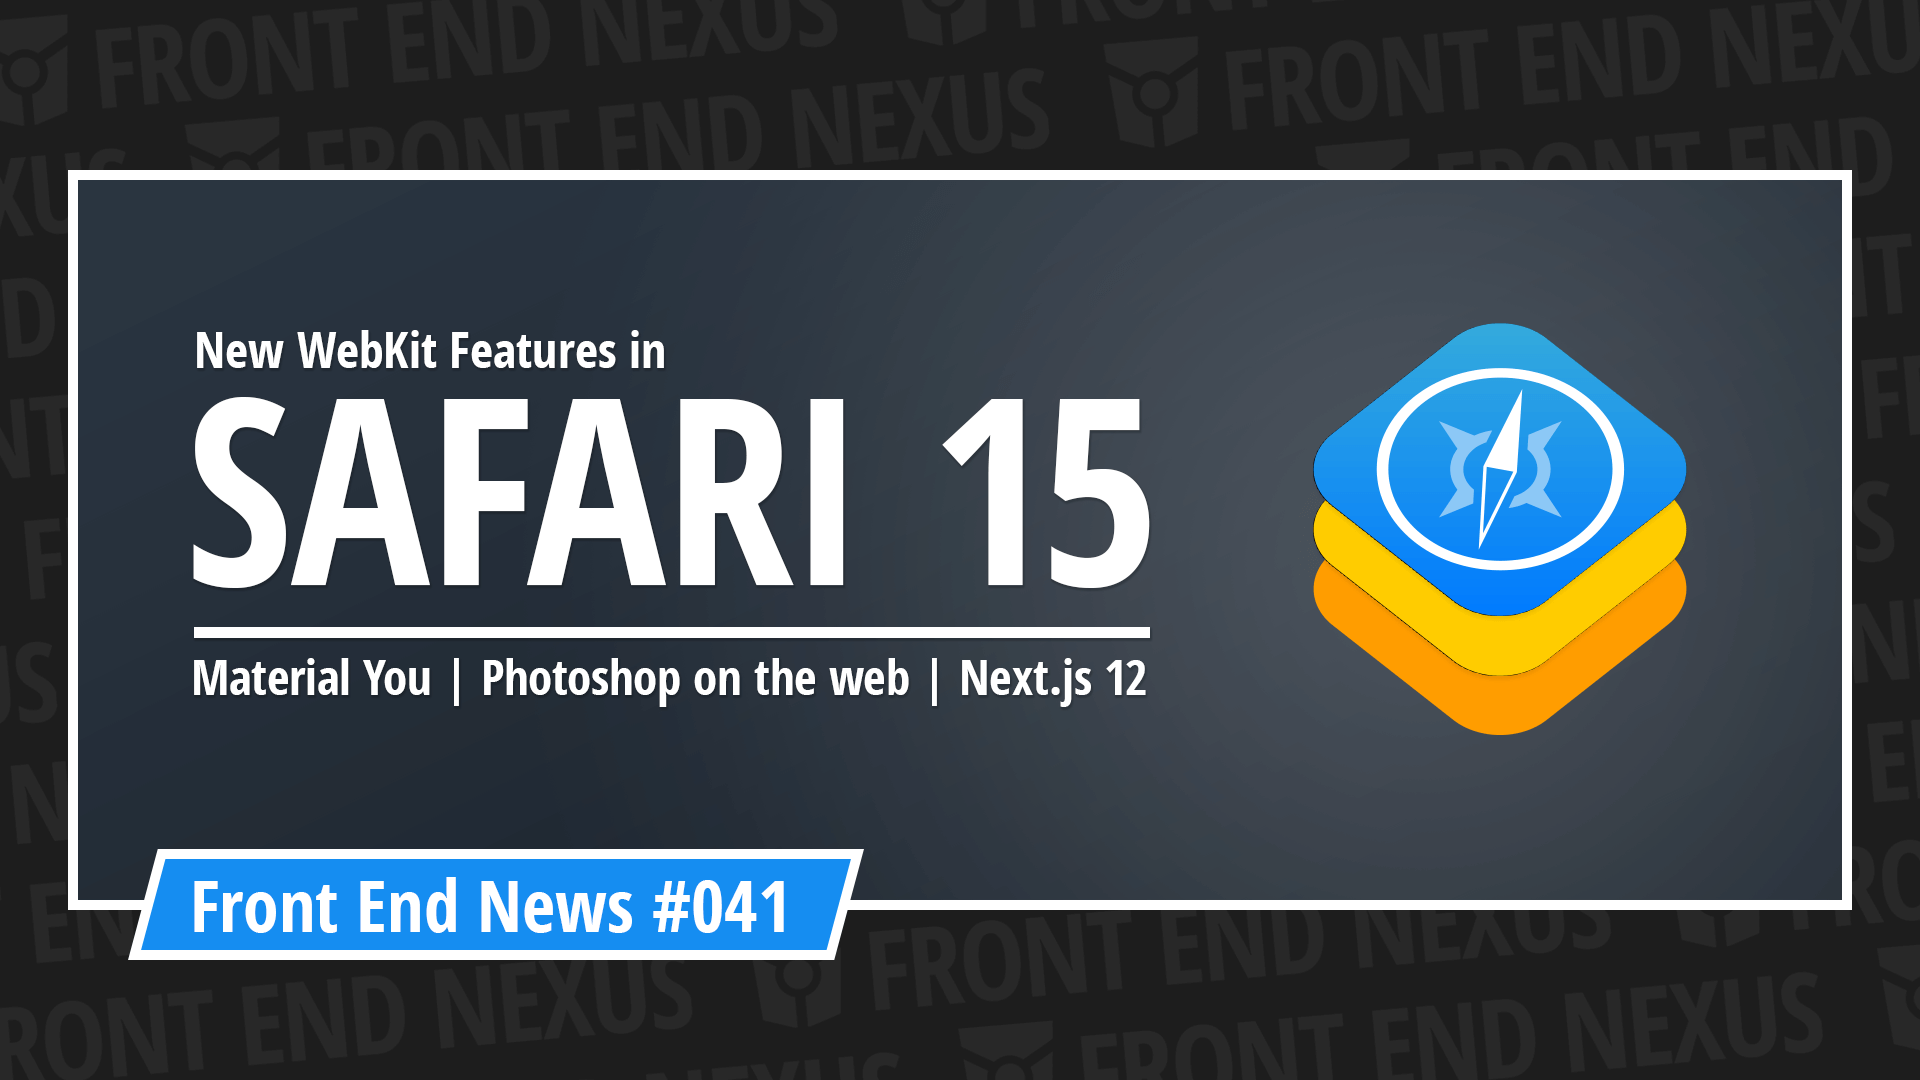 New WebKit features in Safari 15, introducing Material You, Photoshop's journey to the web, and Next 12 | Front End News #041